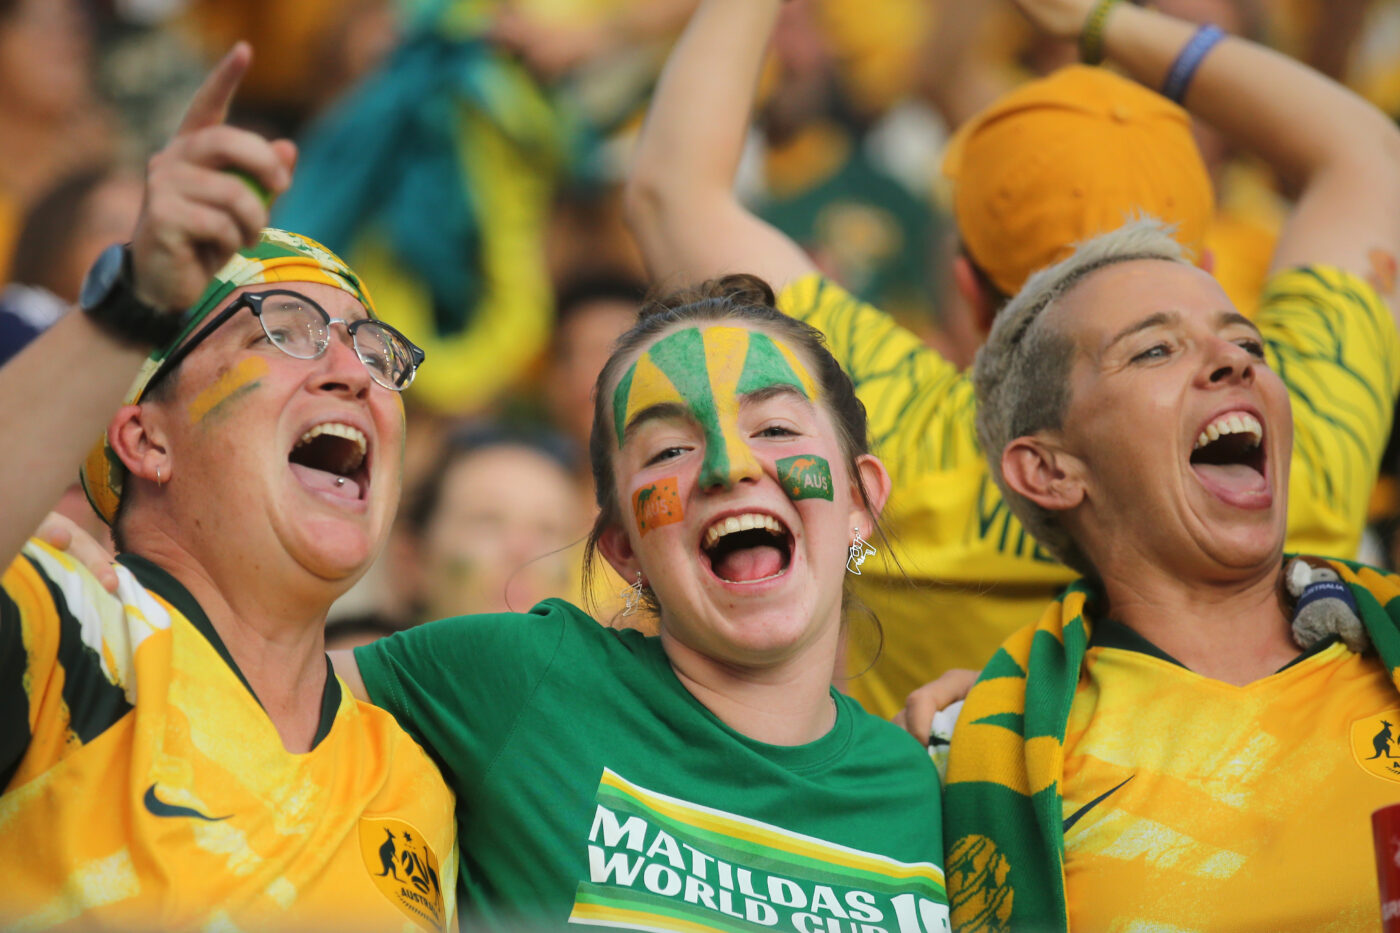 GRENOBLE, FRANCE - JUNE 18: Fans enjoy the pre match atmosphere prior to the 2019 FIFA Women's World Cup France group C match between Jamaica and Australia at Stade des Alpes on June 18, 2019 in Grenoble, France. (Photo by Johannes Simon - FIFA/FIFA via Getty Images)